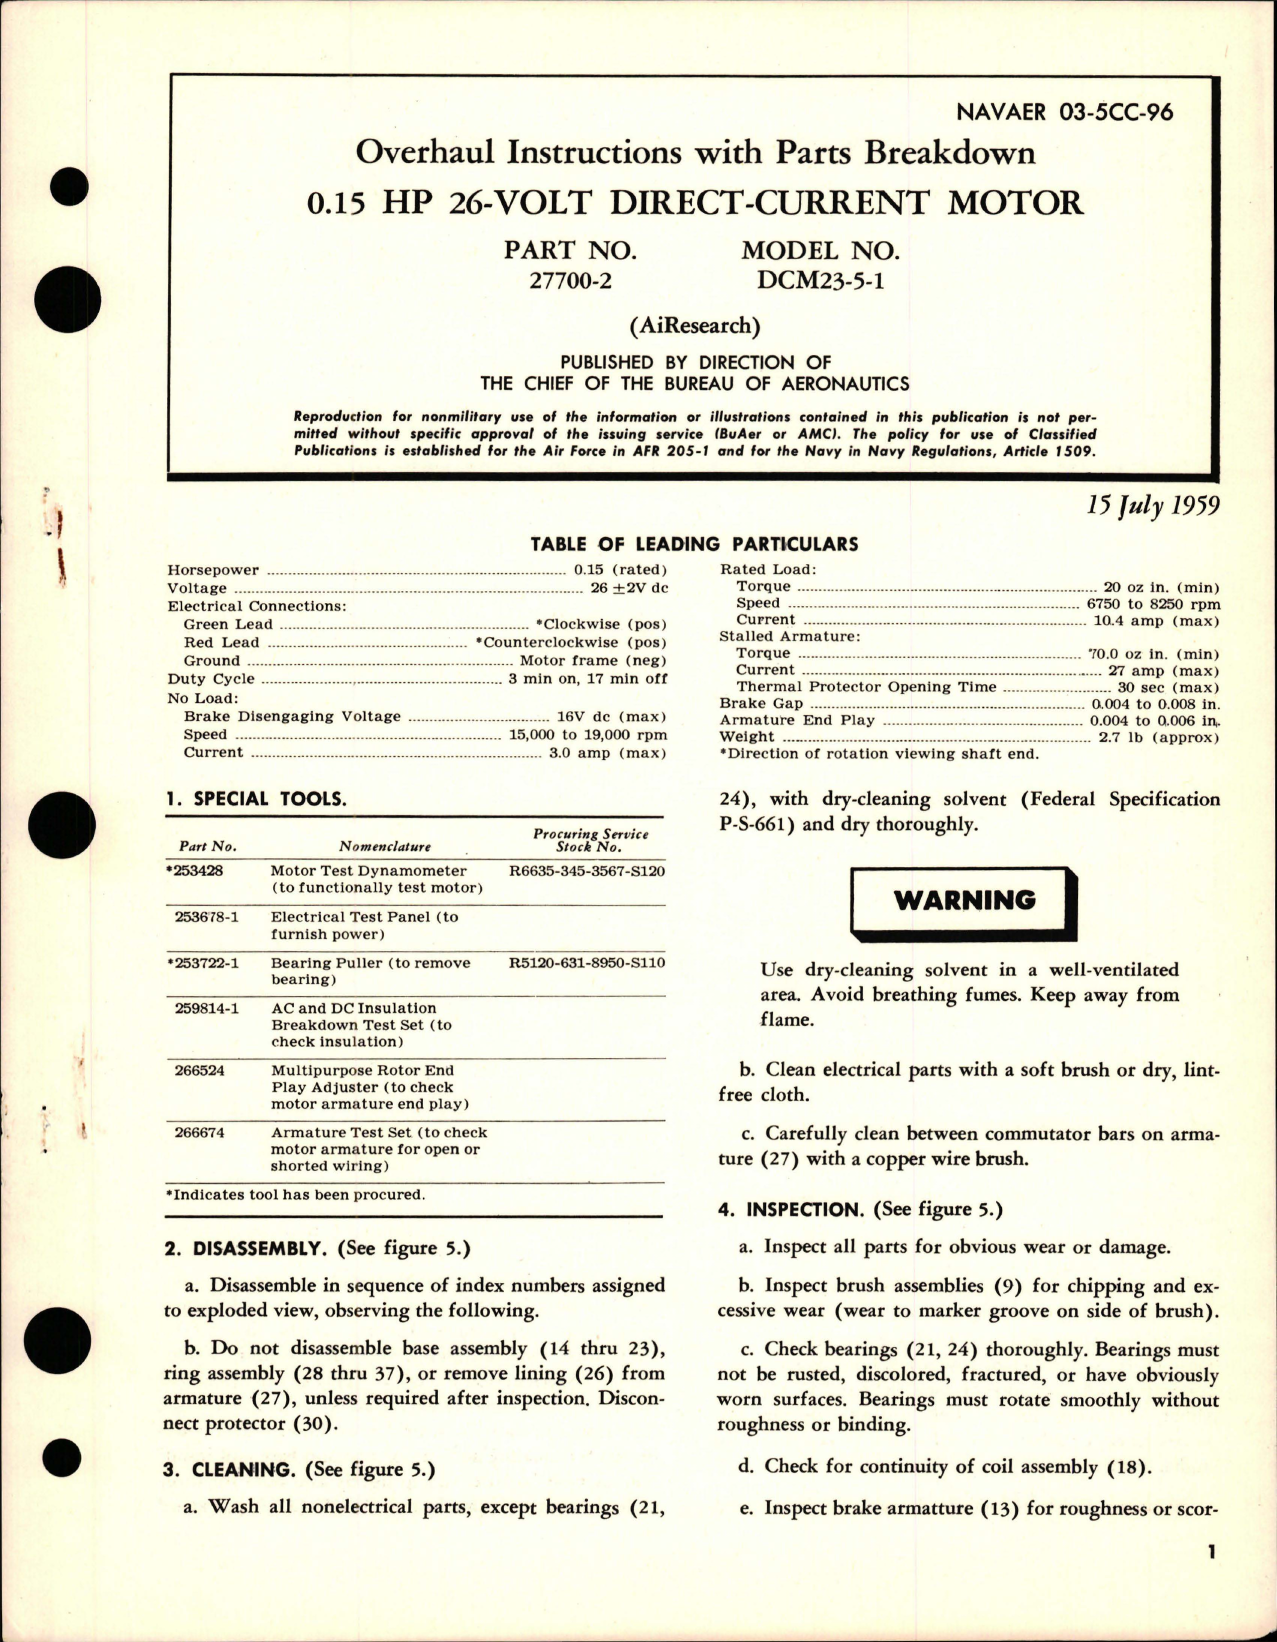 Sample page 1 from AirCorps Library document: Overhaul Instructions with Parts Breakdown for Direct-Current Motor 0.15 HP 26 Volt